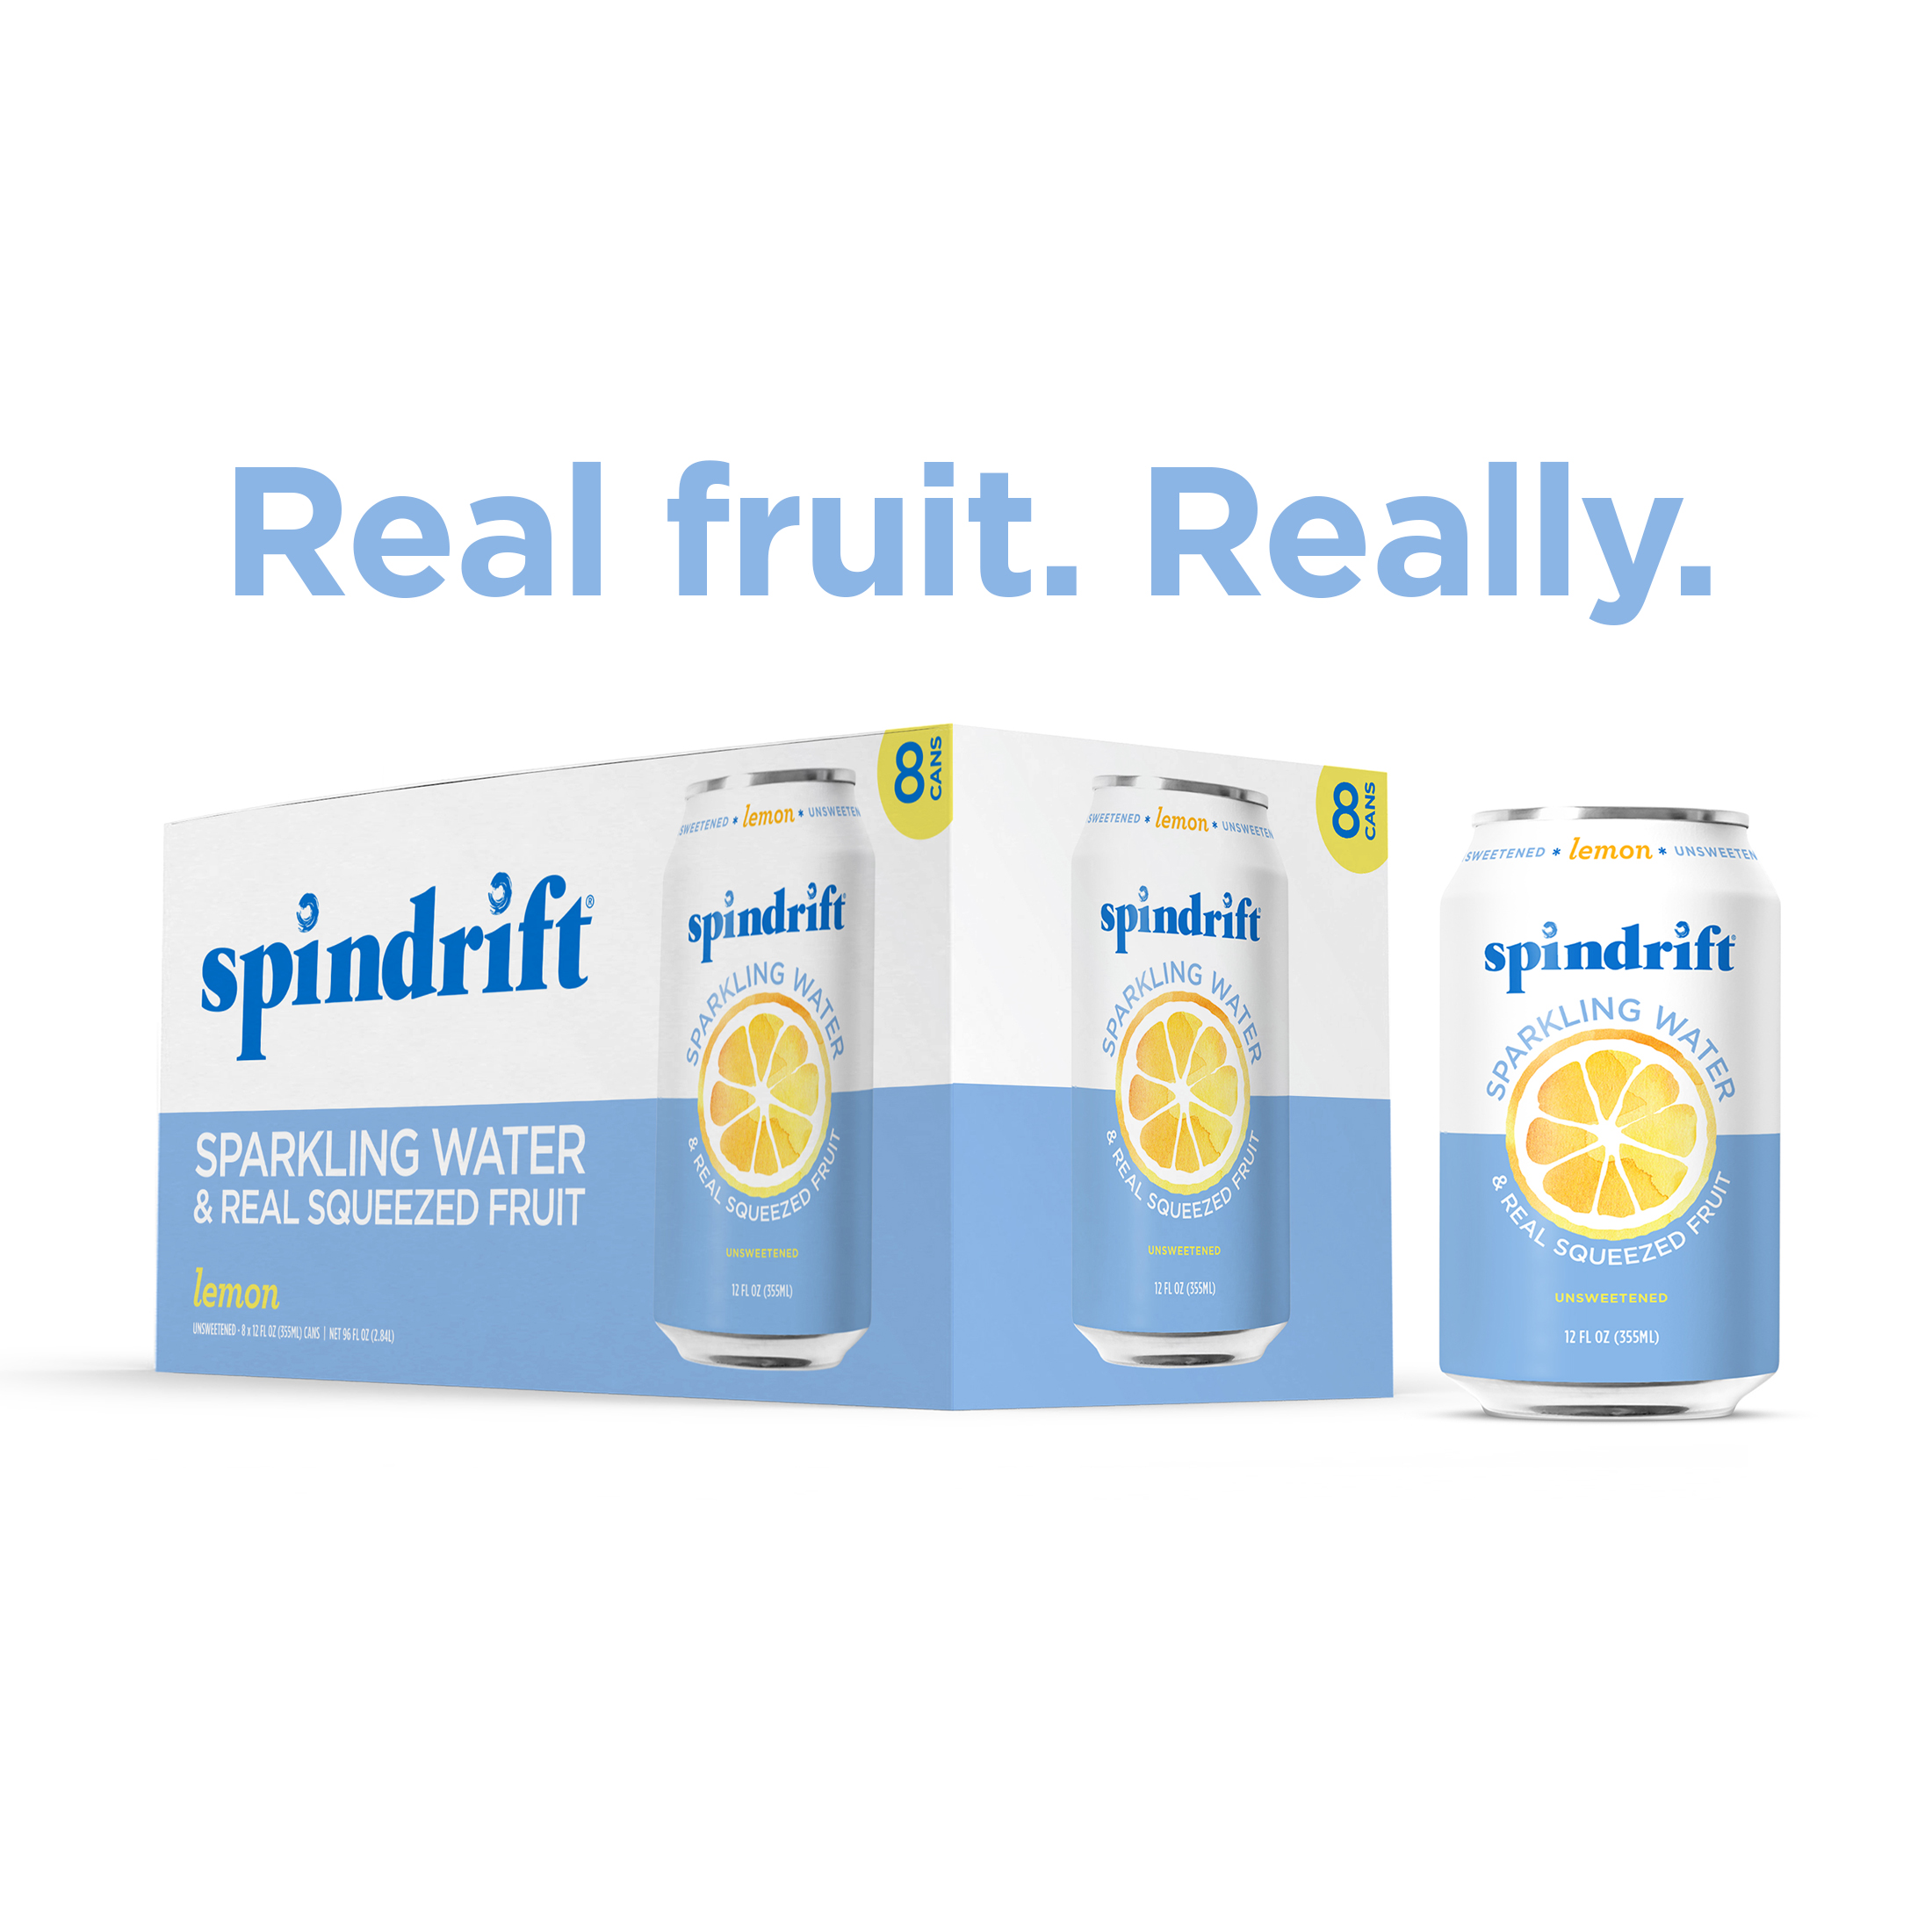 Spindrift Sparkling Water, Lemon Flavored, Made with Real Squeezed Fruit,12 fl oz, 8 Count, No Sugar Added, 3 Calories per Can - image 1 of 7